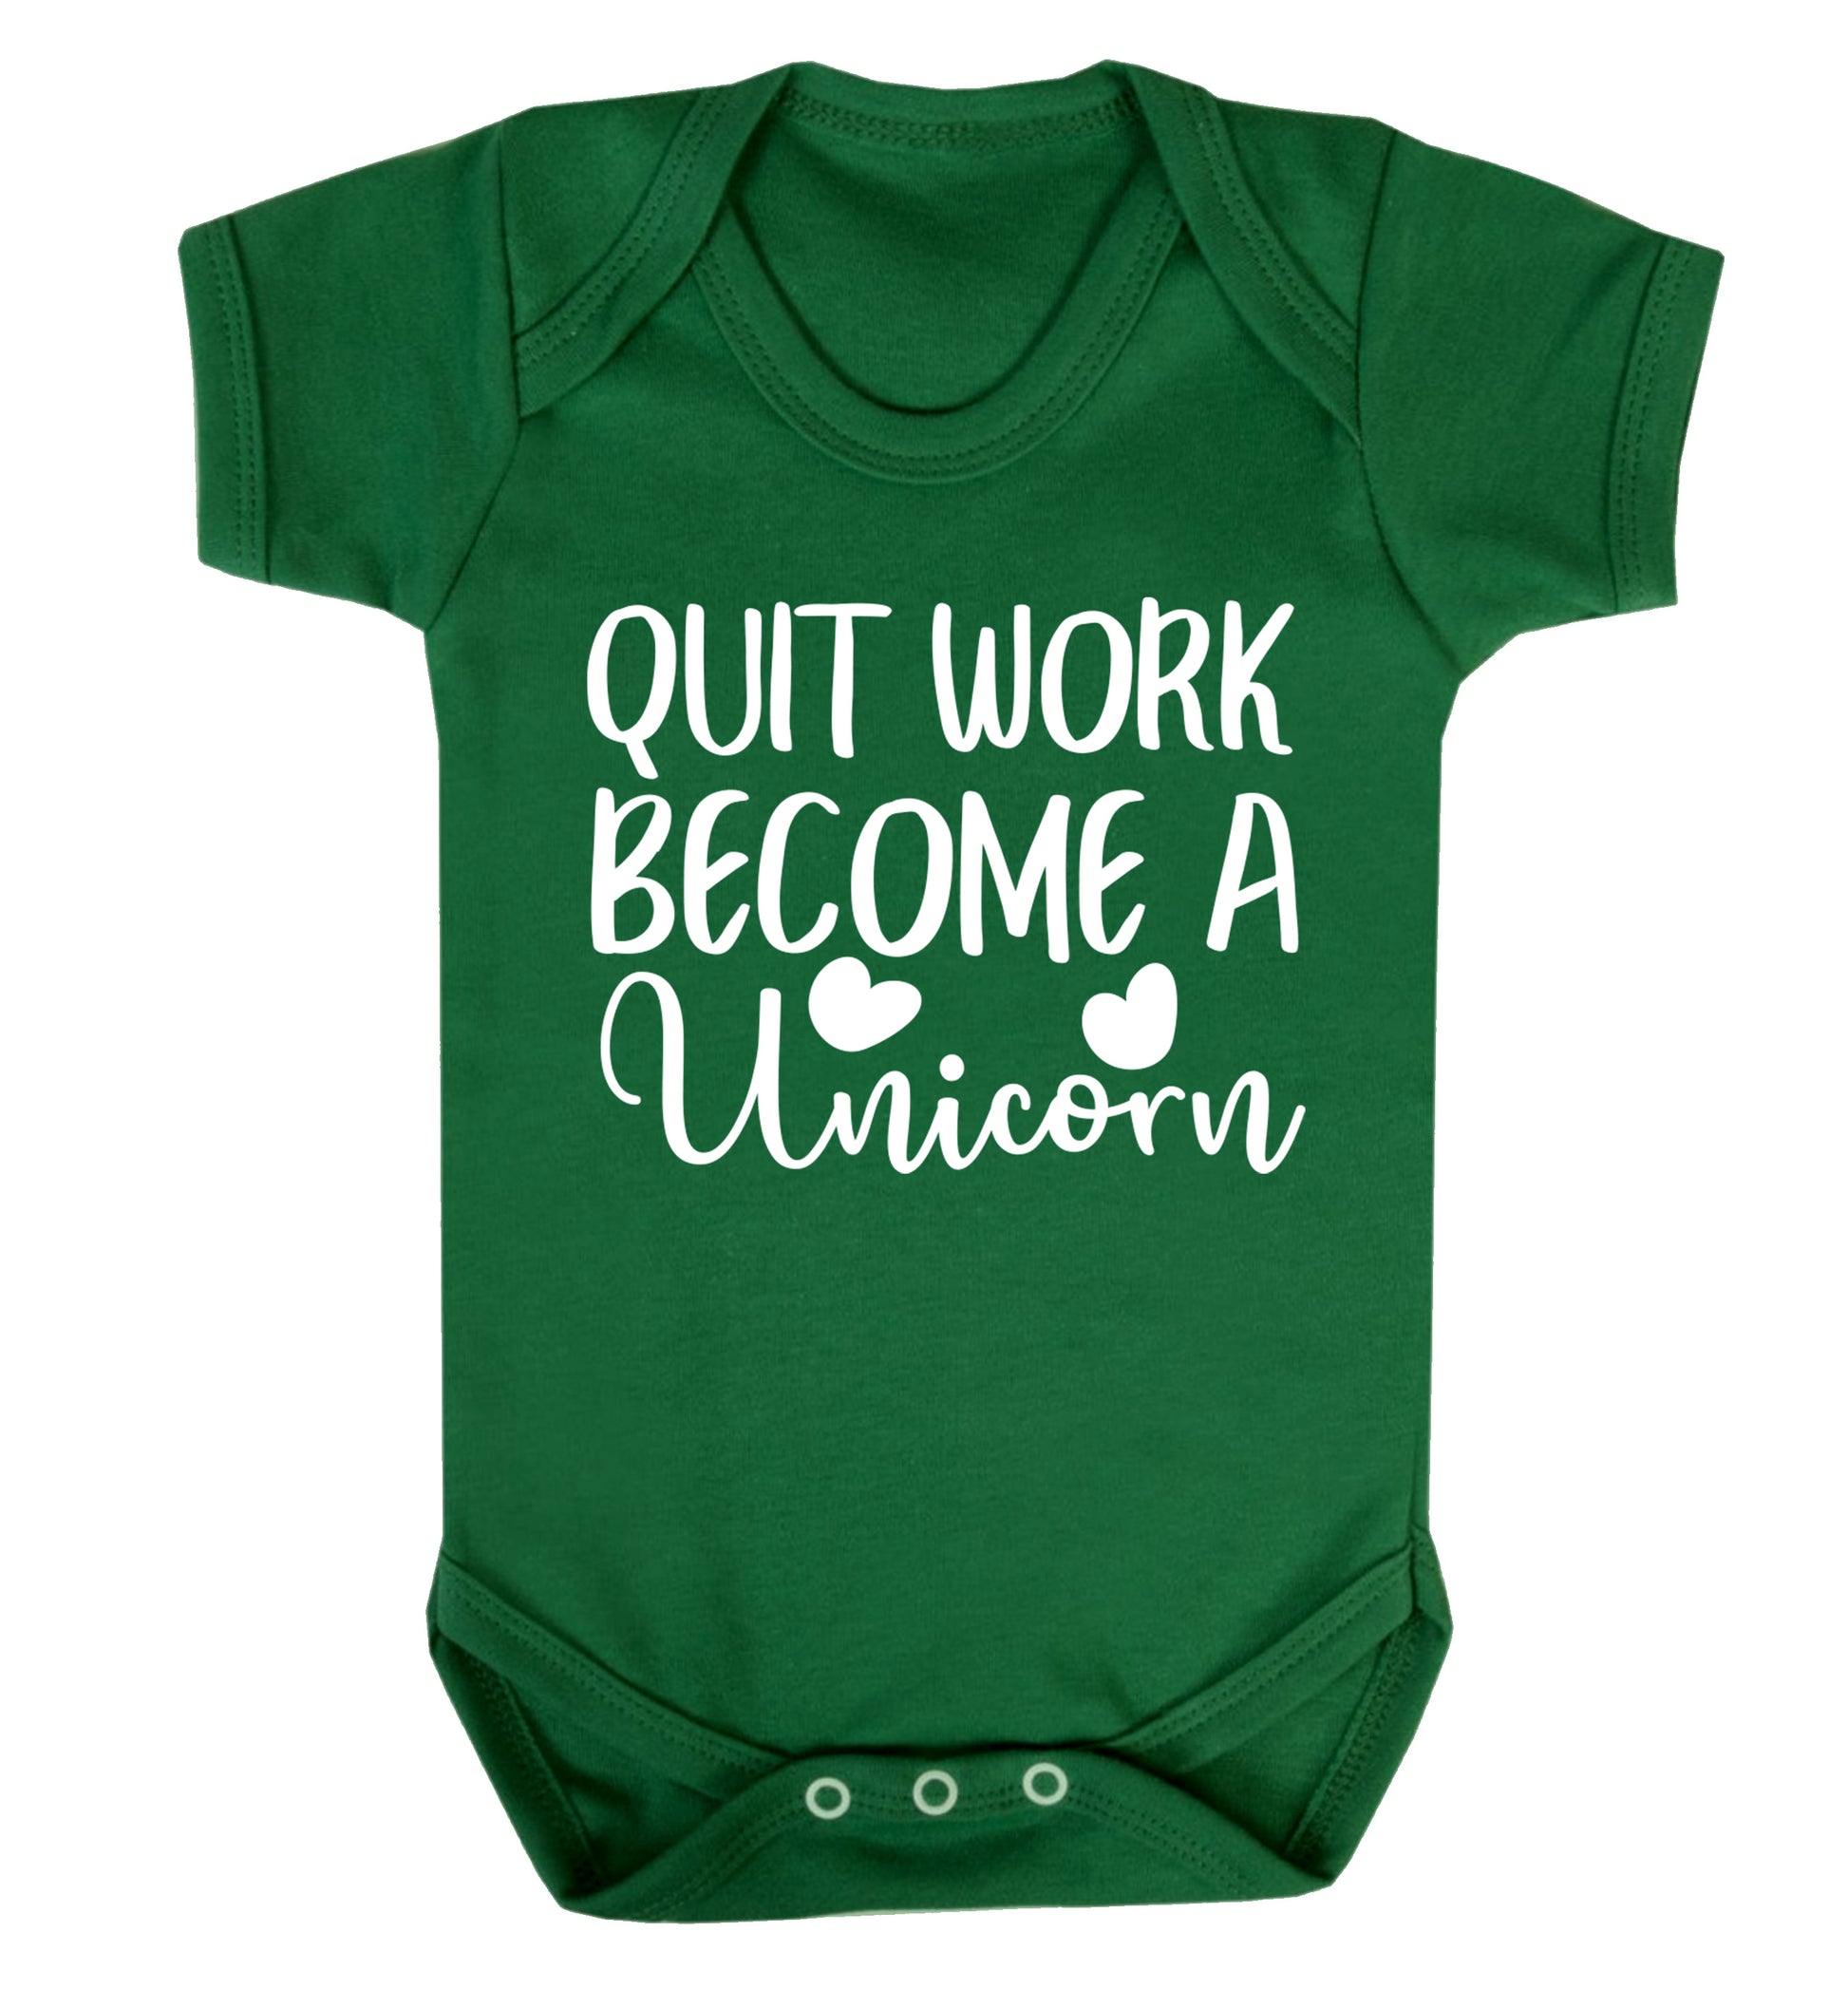 Quit work become a unicorn Baby Vest green 18-24 months